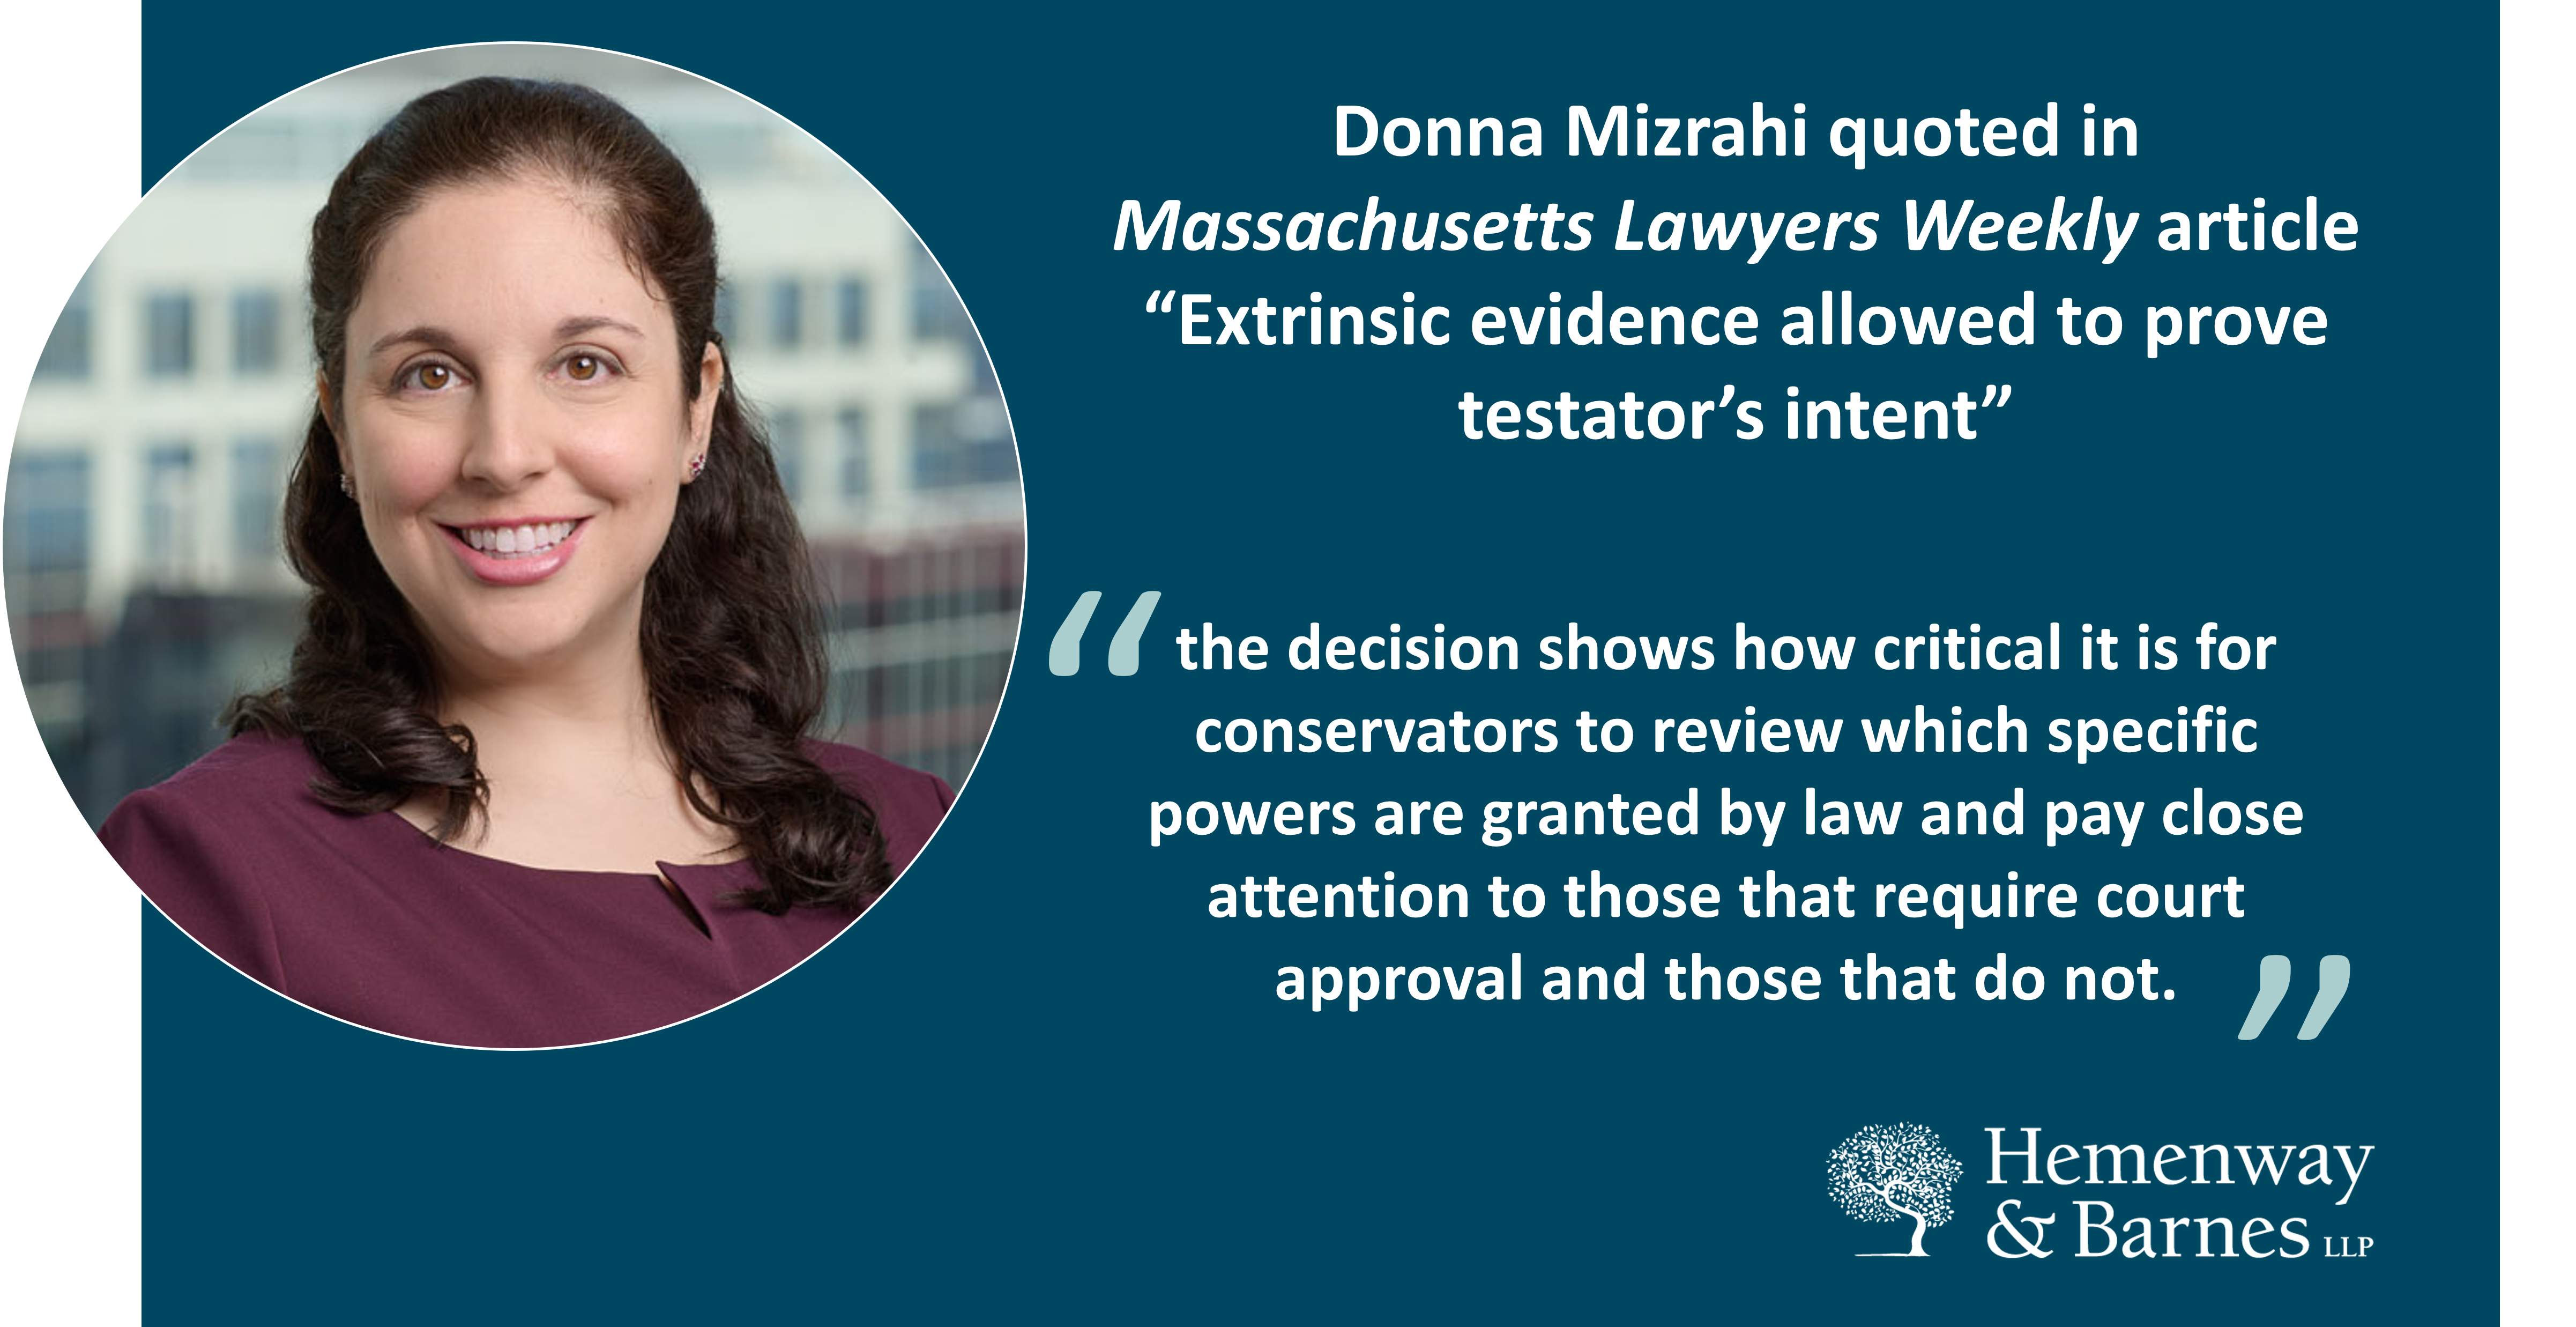 Donna Mizrahi quoted in Massachusetts Lawyers Weekly article “Extrinsic evidence allowed to prove testator’s intent”